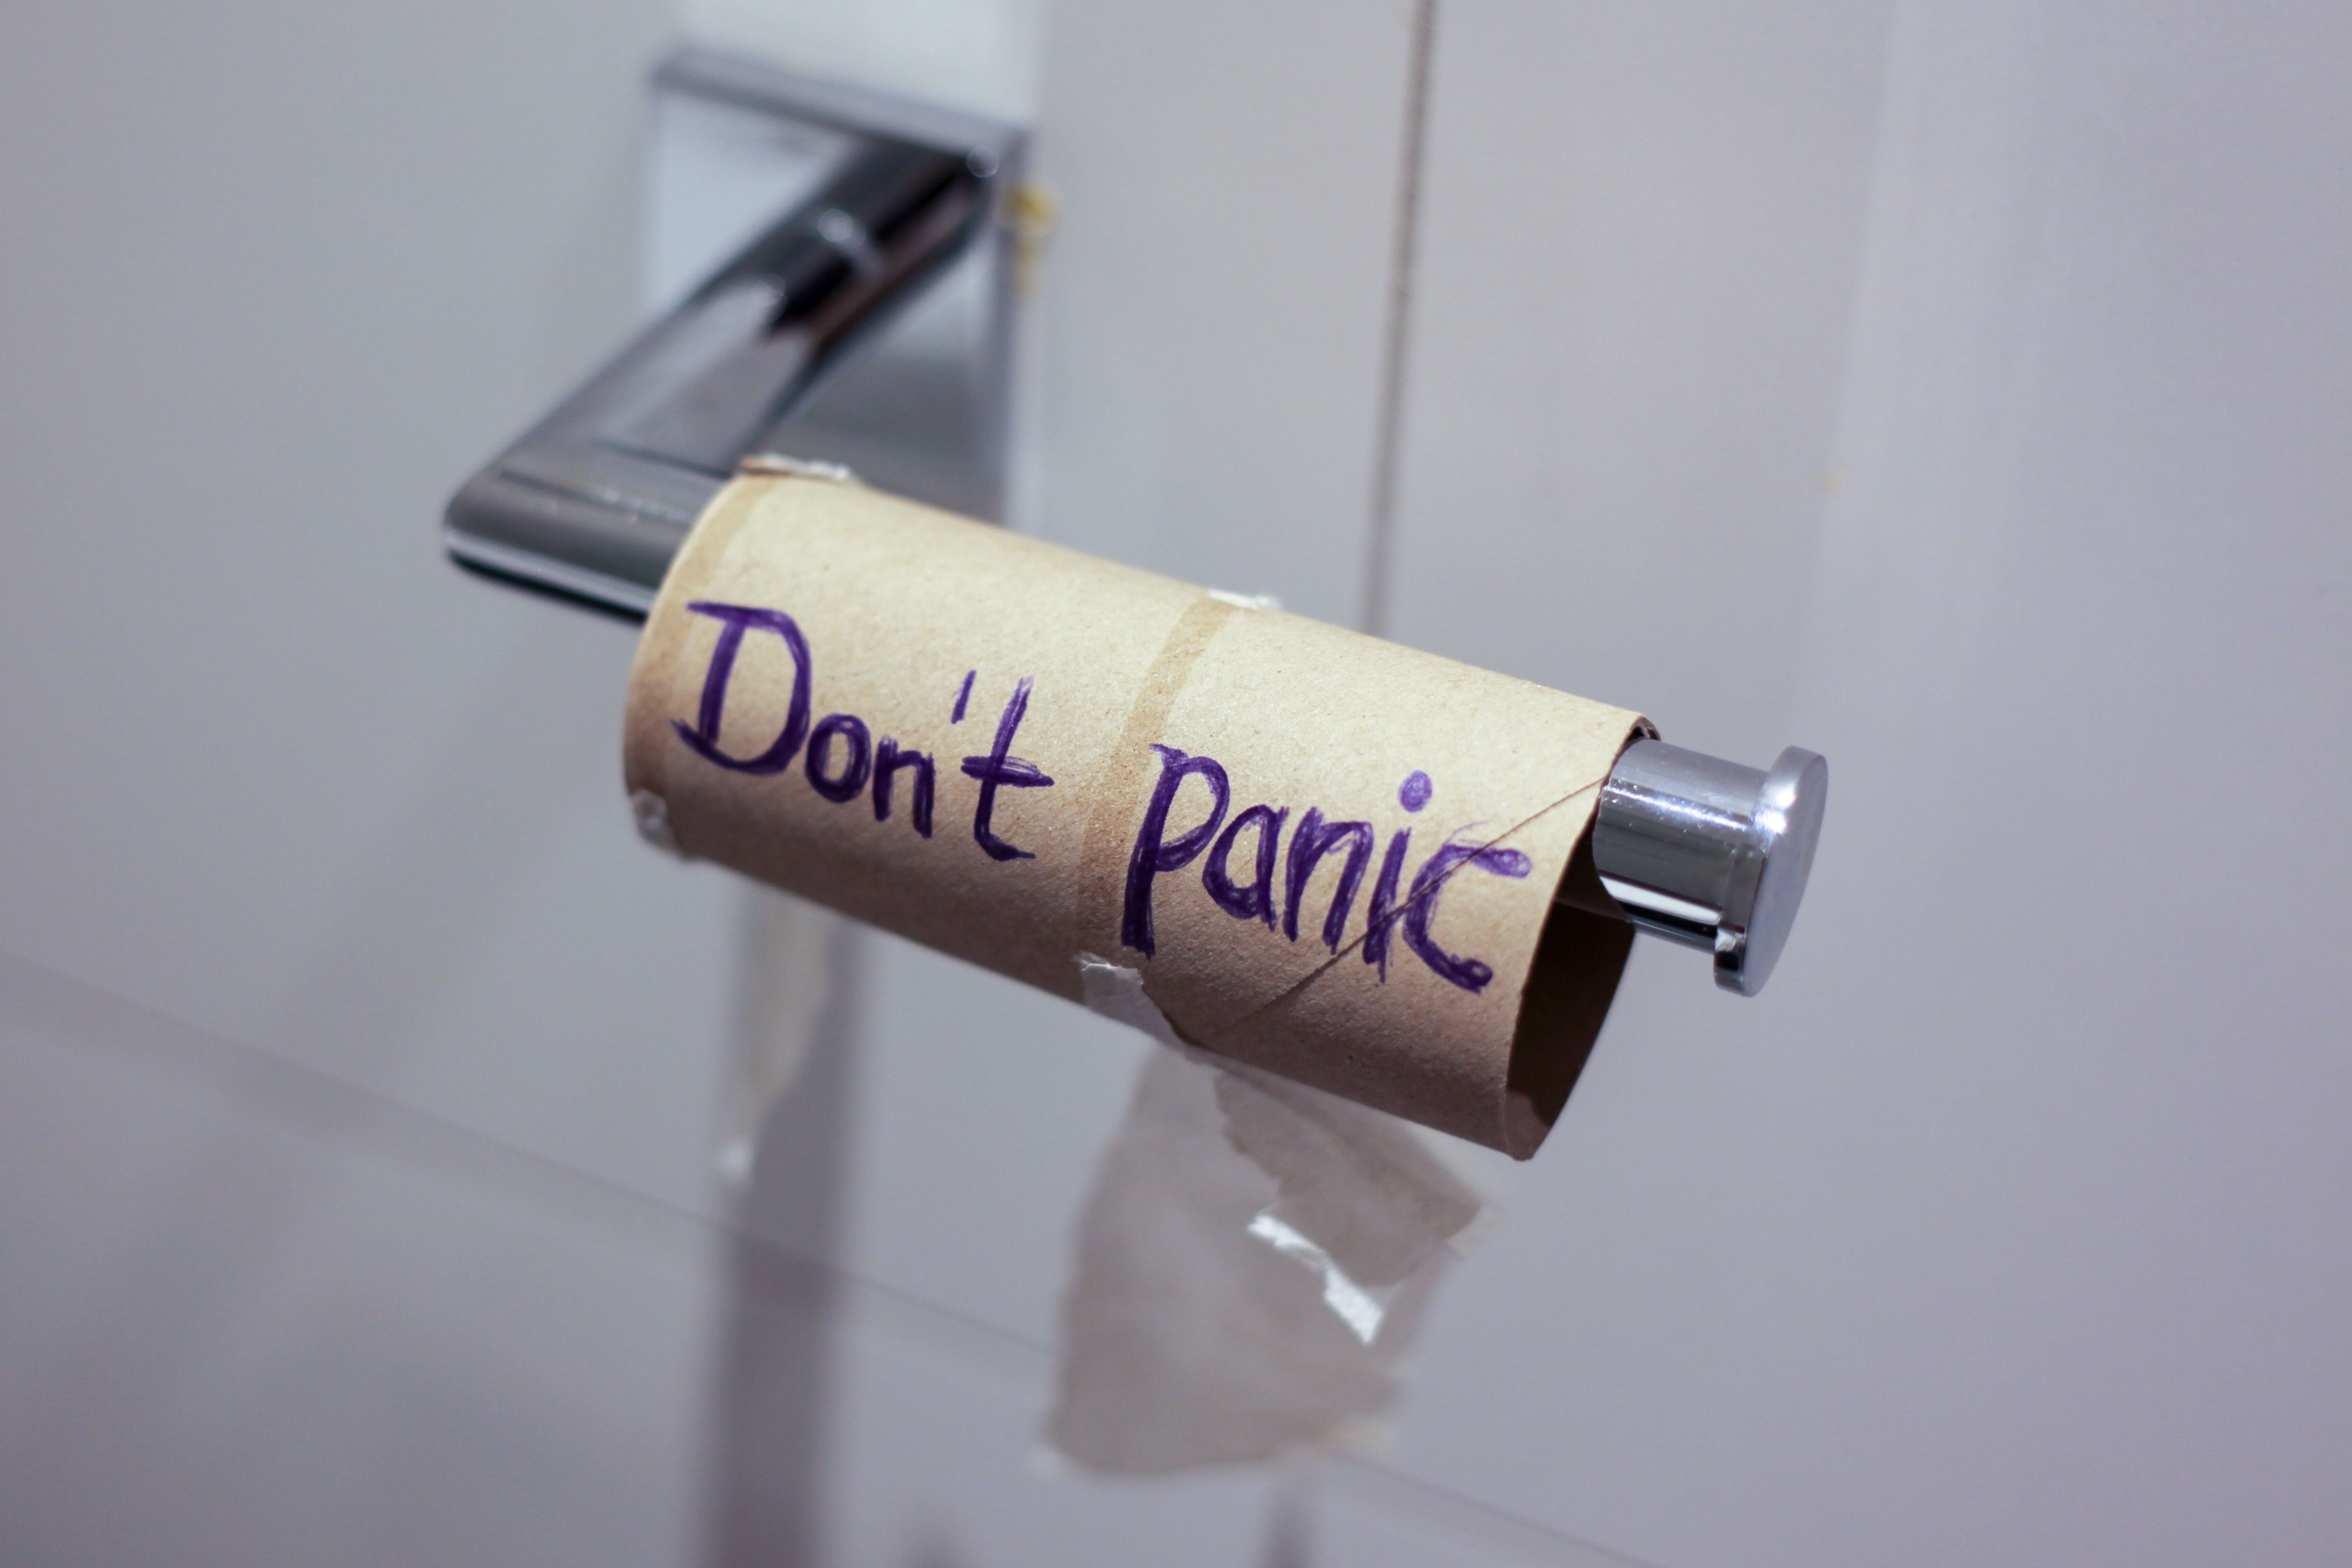 Image toilet paper that says 'don't panic'